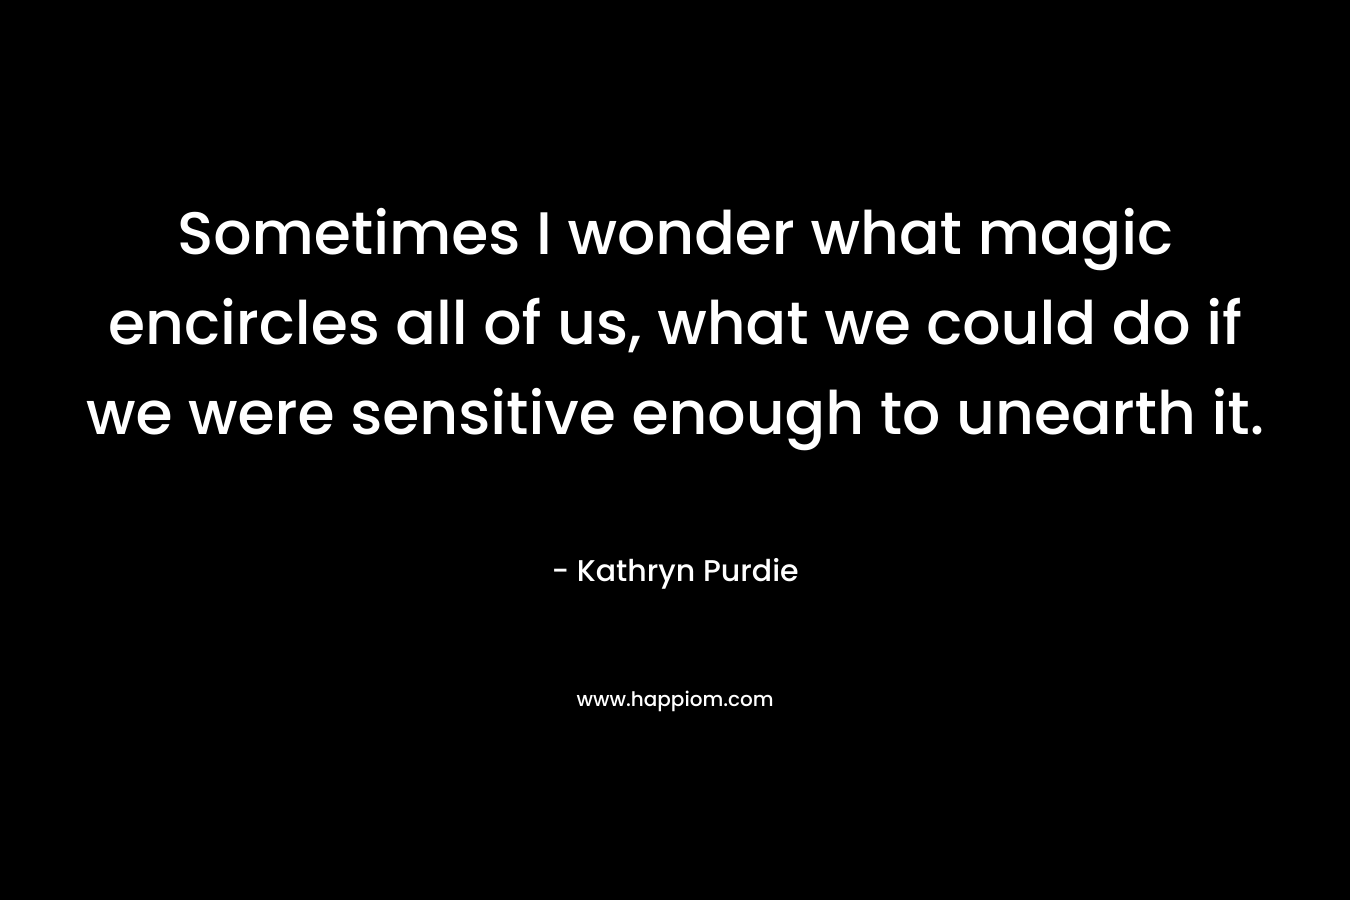 Sometimes I wonder what magic encircles all of us, what we could do if we were sensitive enough to unearth it.